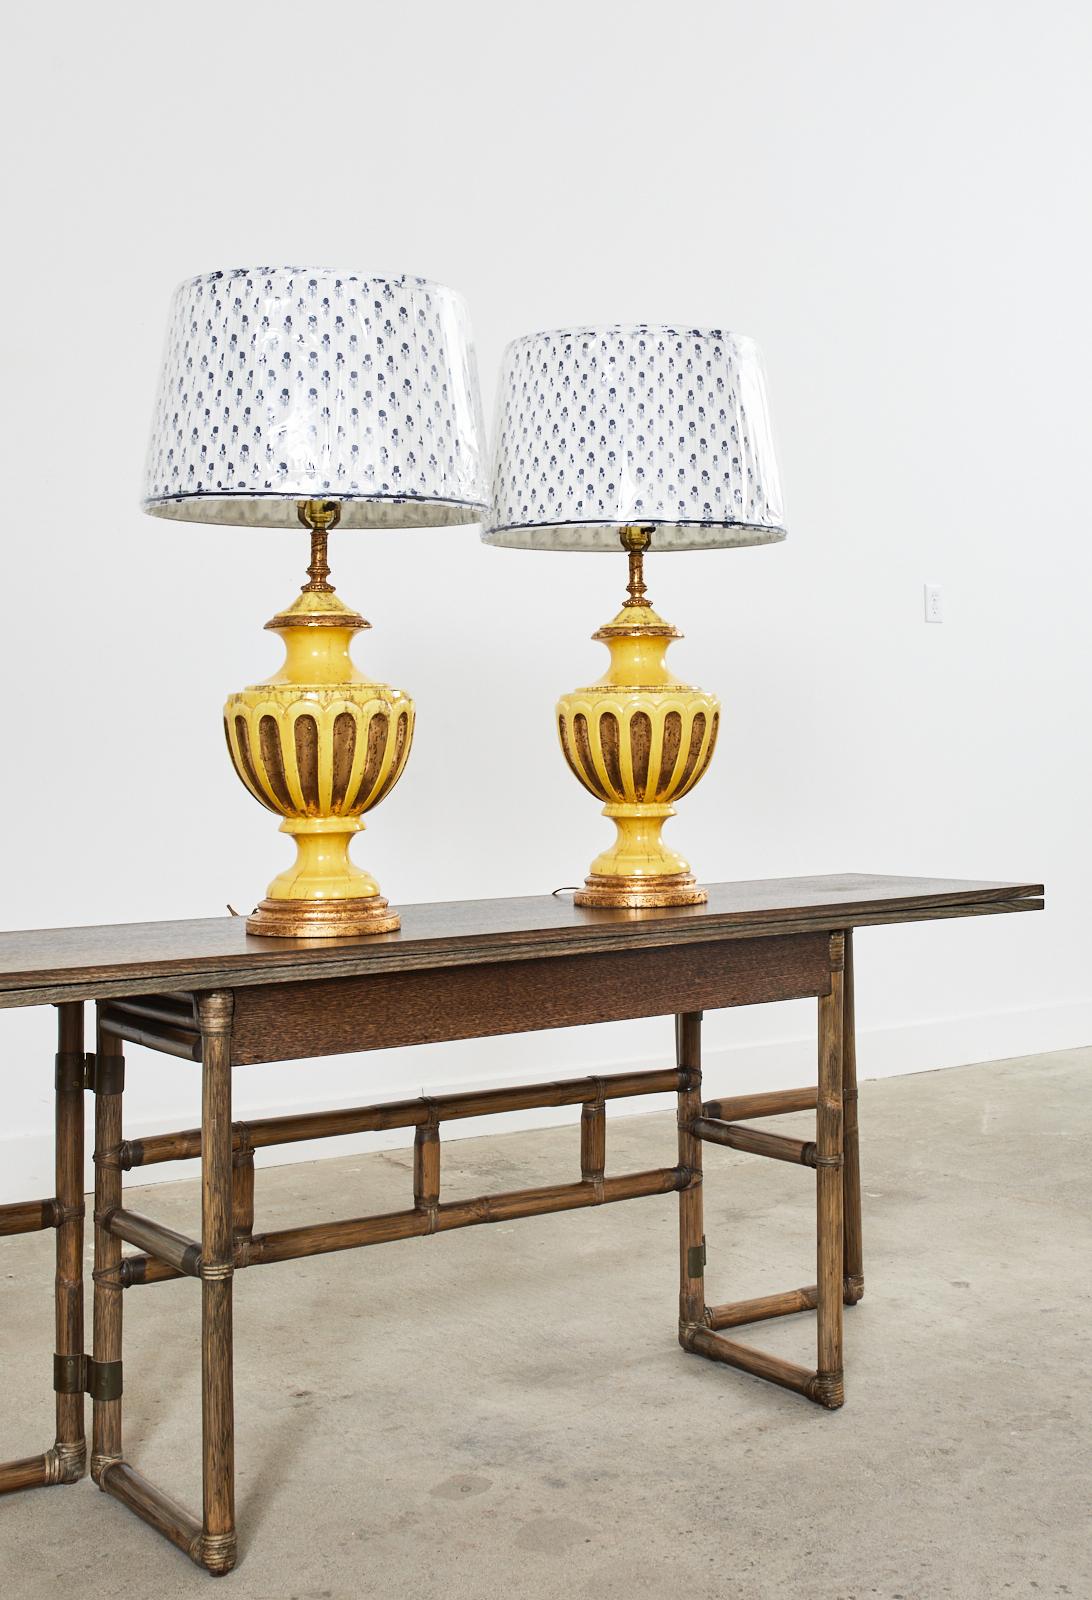 Pair of Hollywood Regency Lamps by Nardini Studio of California For Sale 5